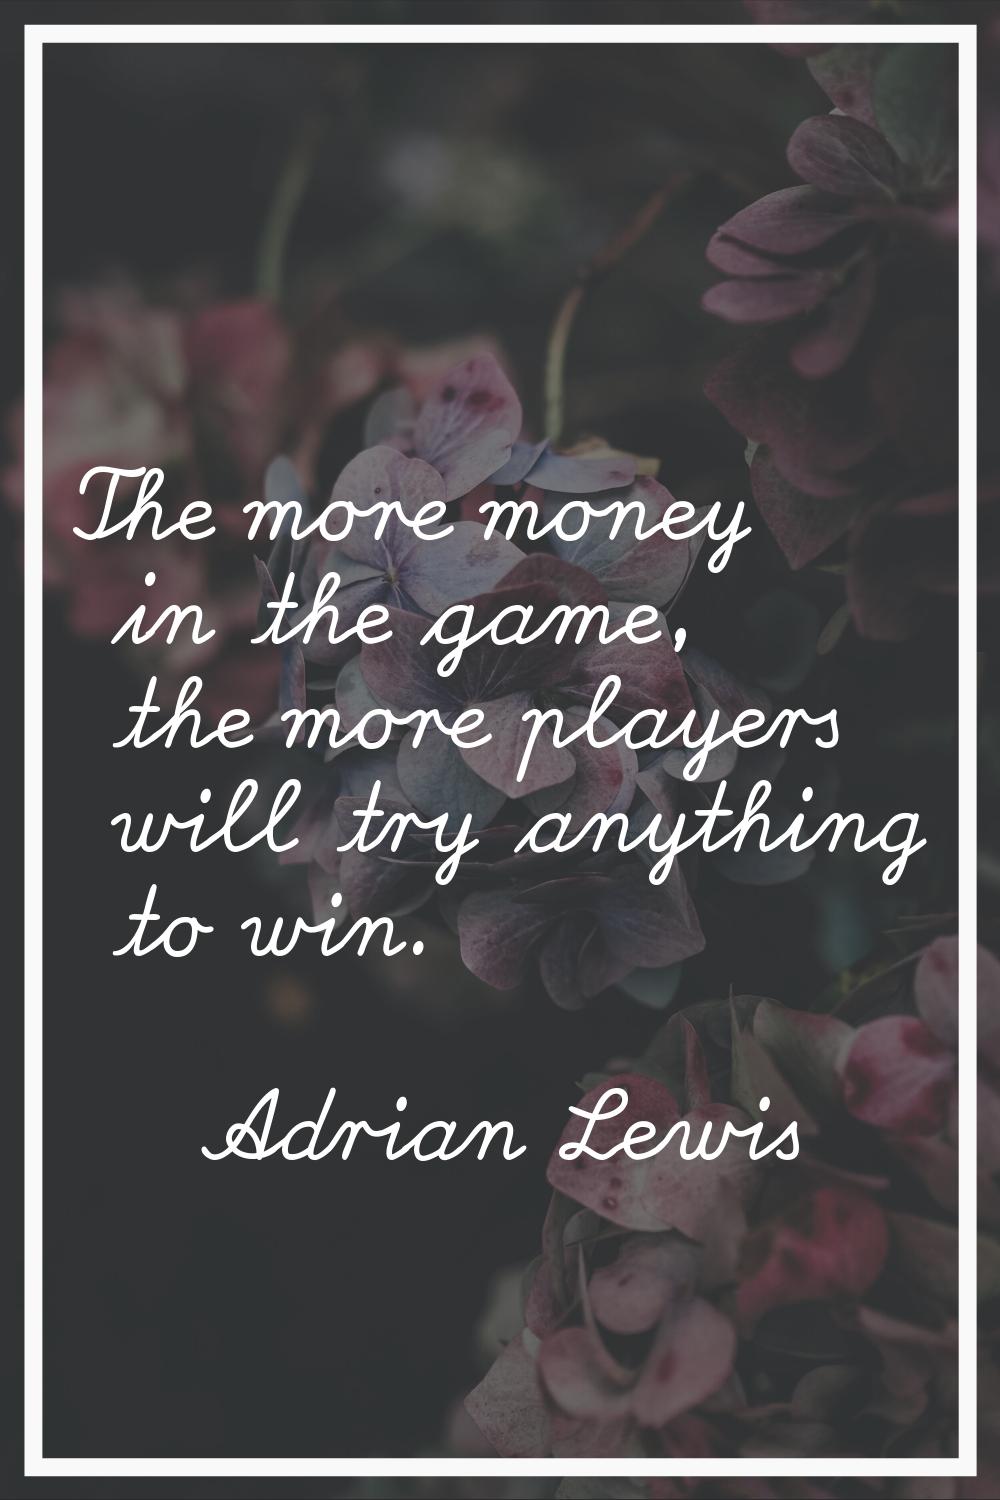 The more money in the game, the more players will try anything to win.